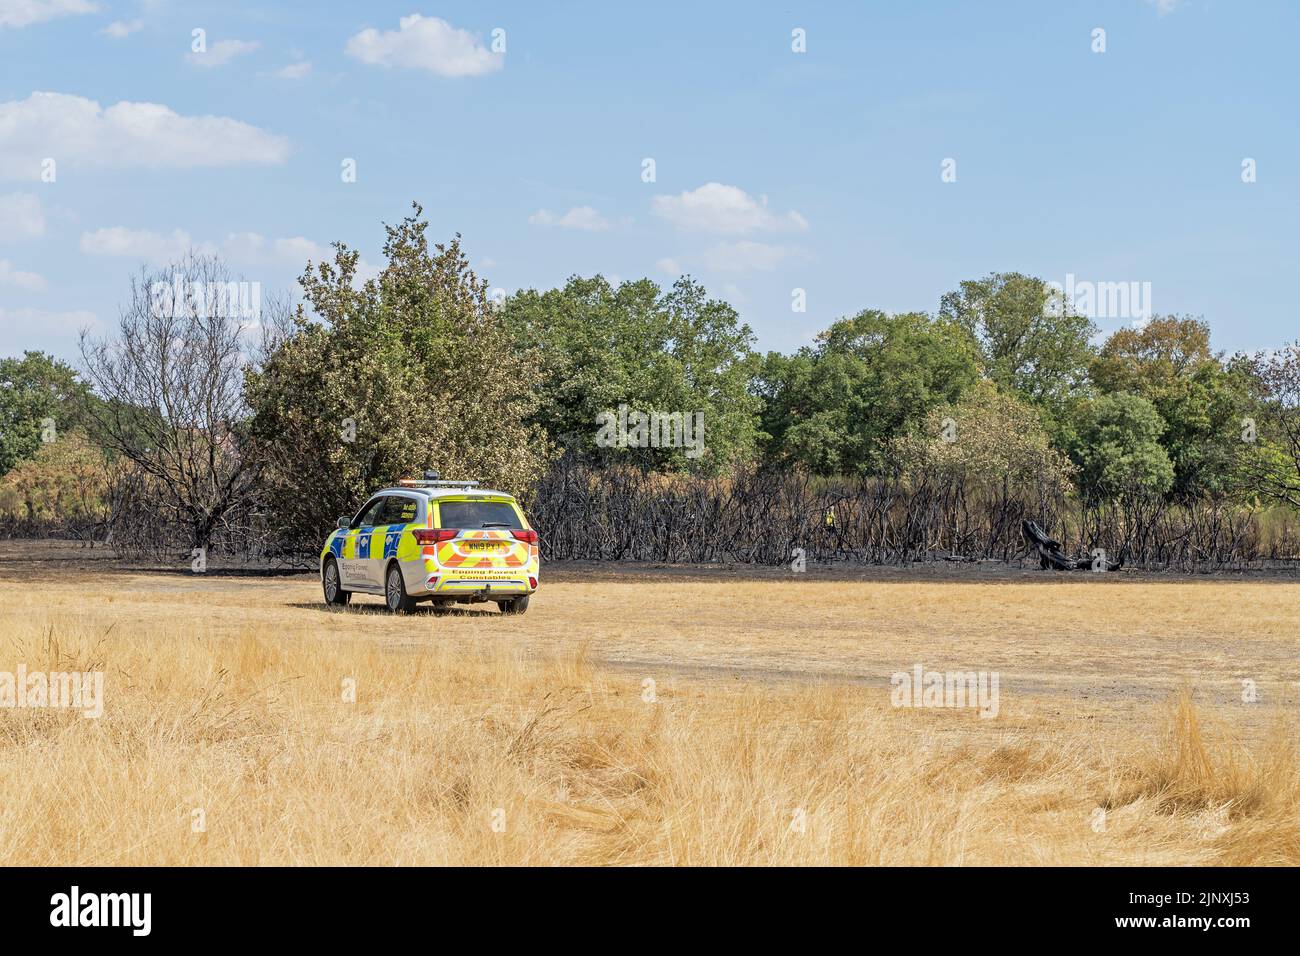 Epping Forest police and council deal with a large forest fire at Hollow Ponds after weeks of drought and heatwave. London - 14th August 2022 Stock Photo